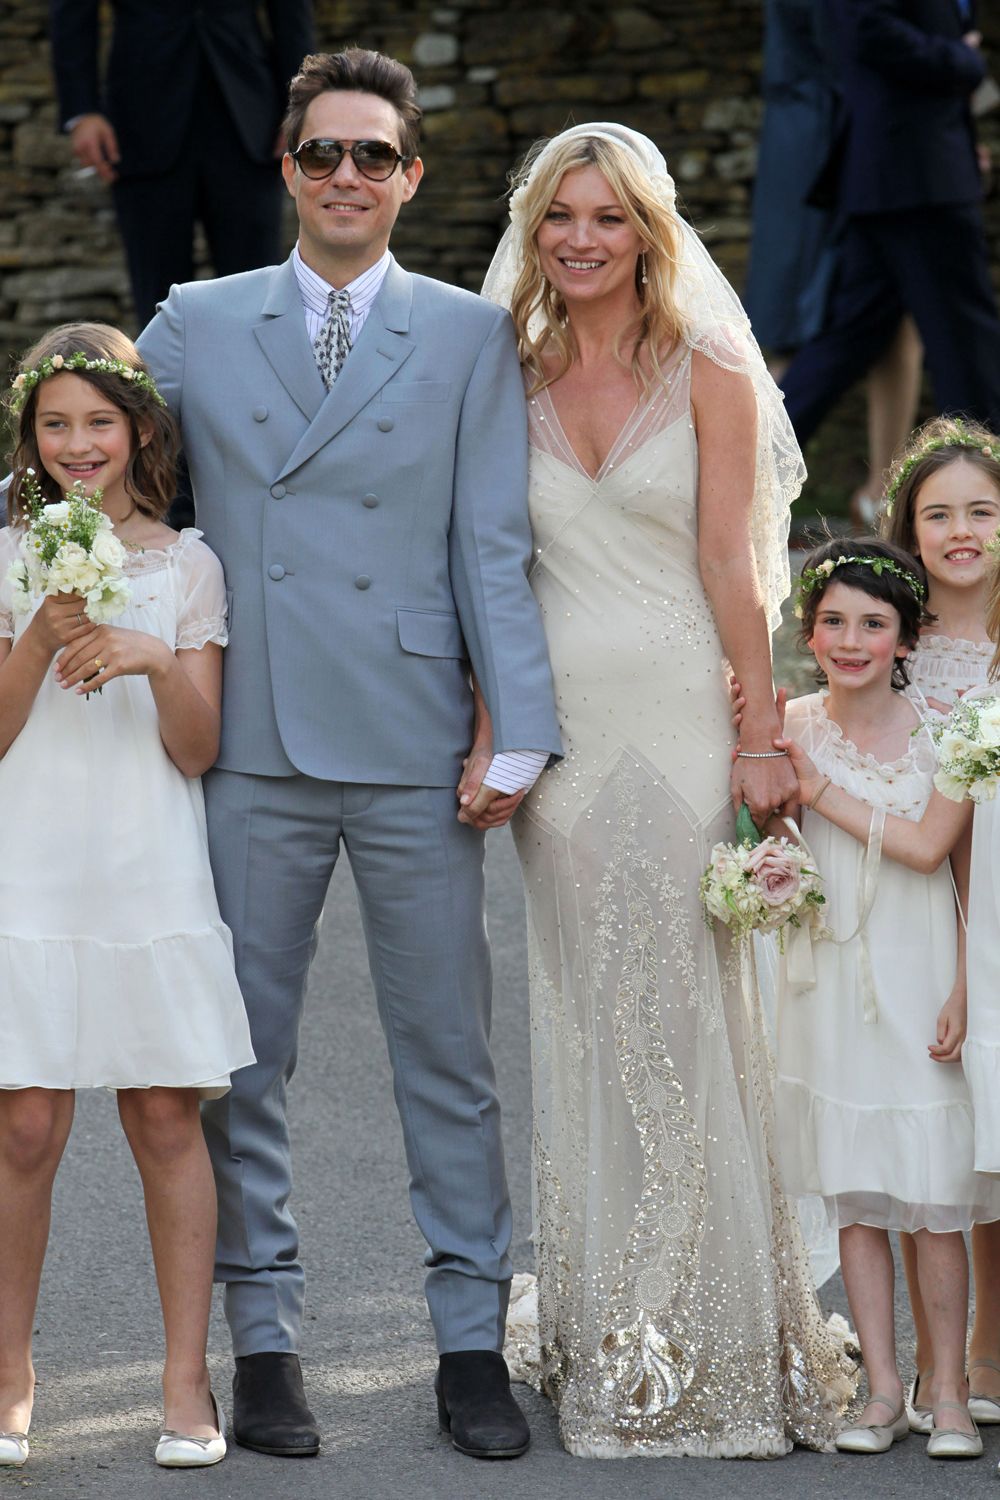 Best Celebrity Wedding Dresses - 35 Famous Wedding Gowns from Kate to the